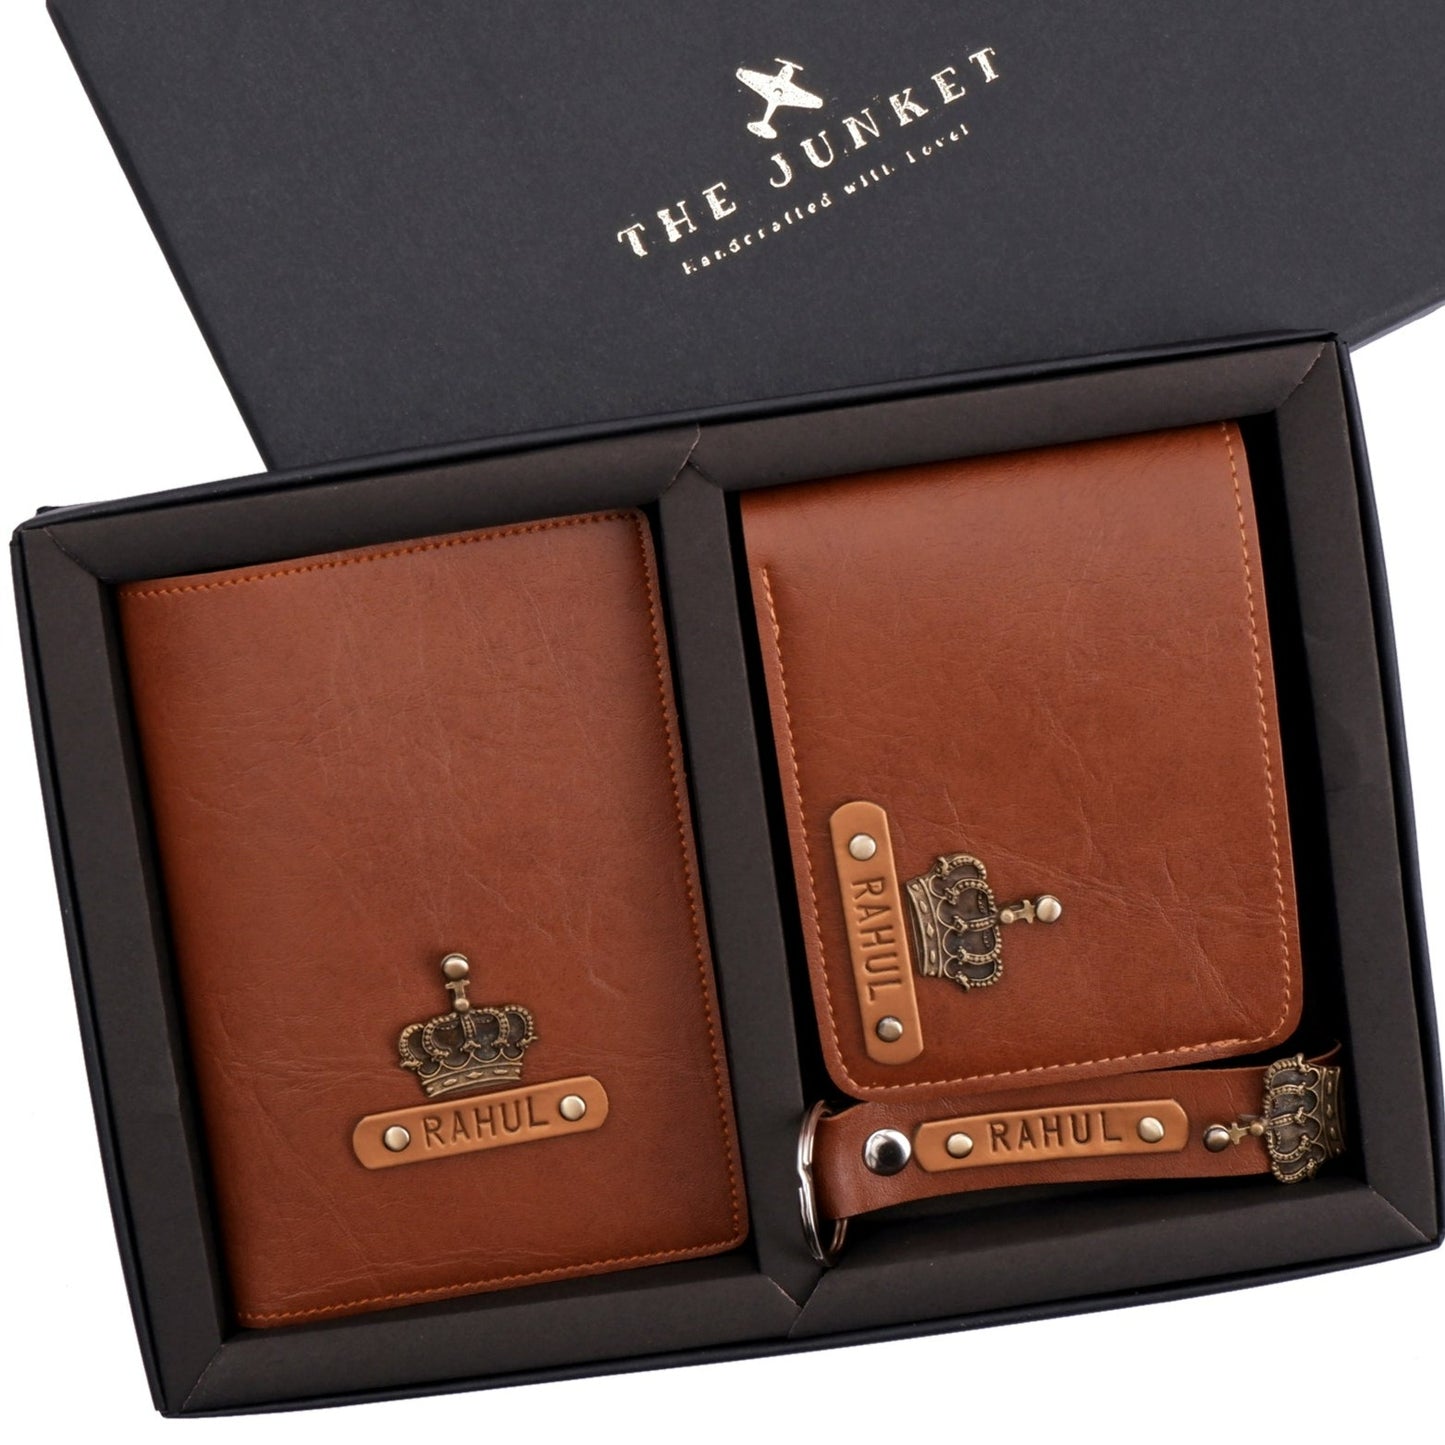 Fashionable personalised bags, men wallets, and leather purses